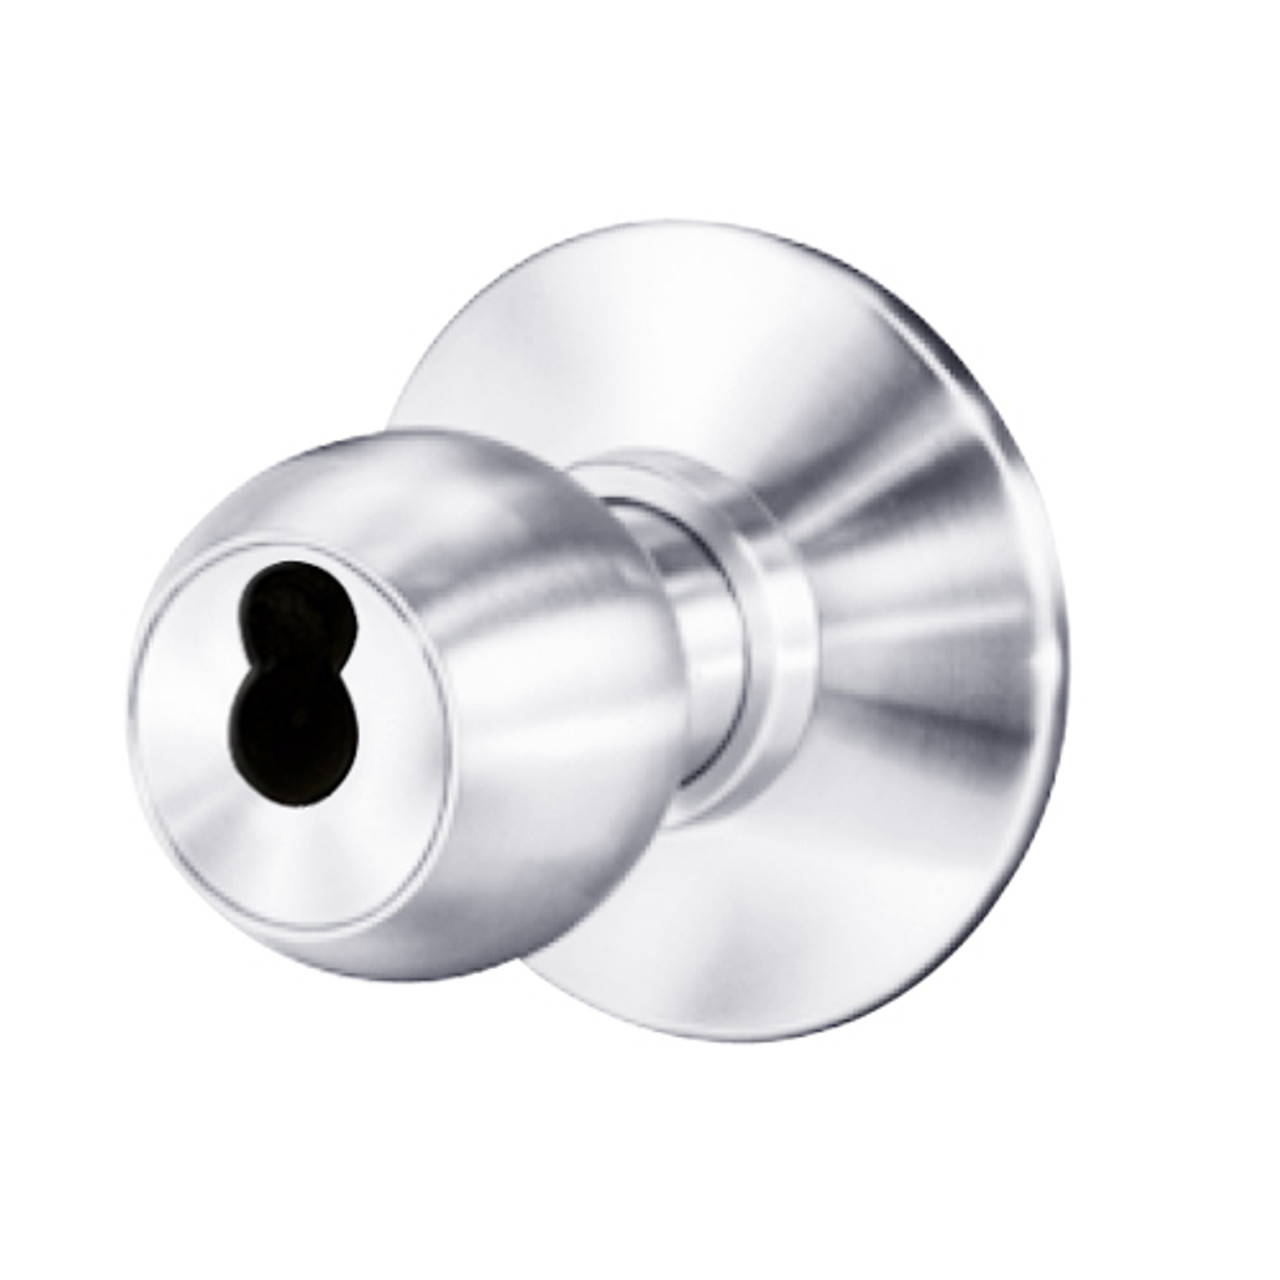 8K37EA4DSTK625 Best 8K Series Entrance or Office Heavy Duty Cylindrical Knob Locks with Round Style in Bright Chrome